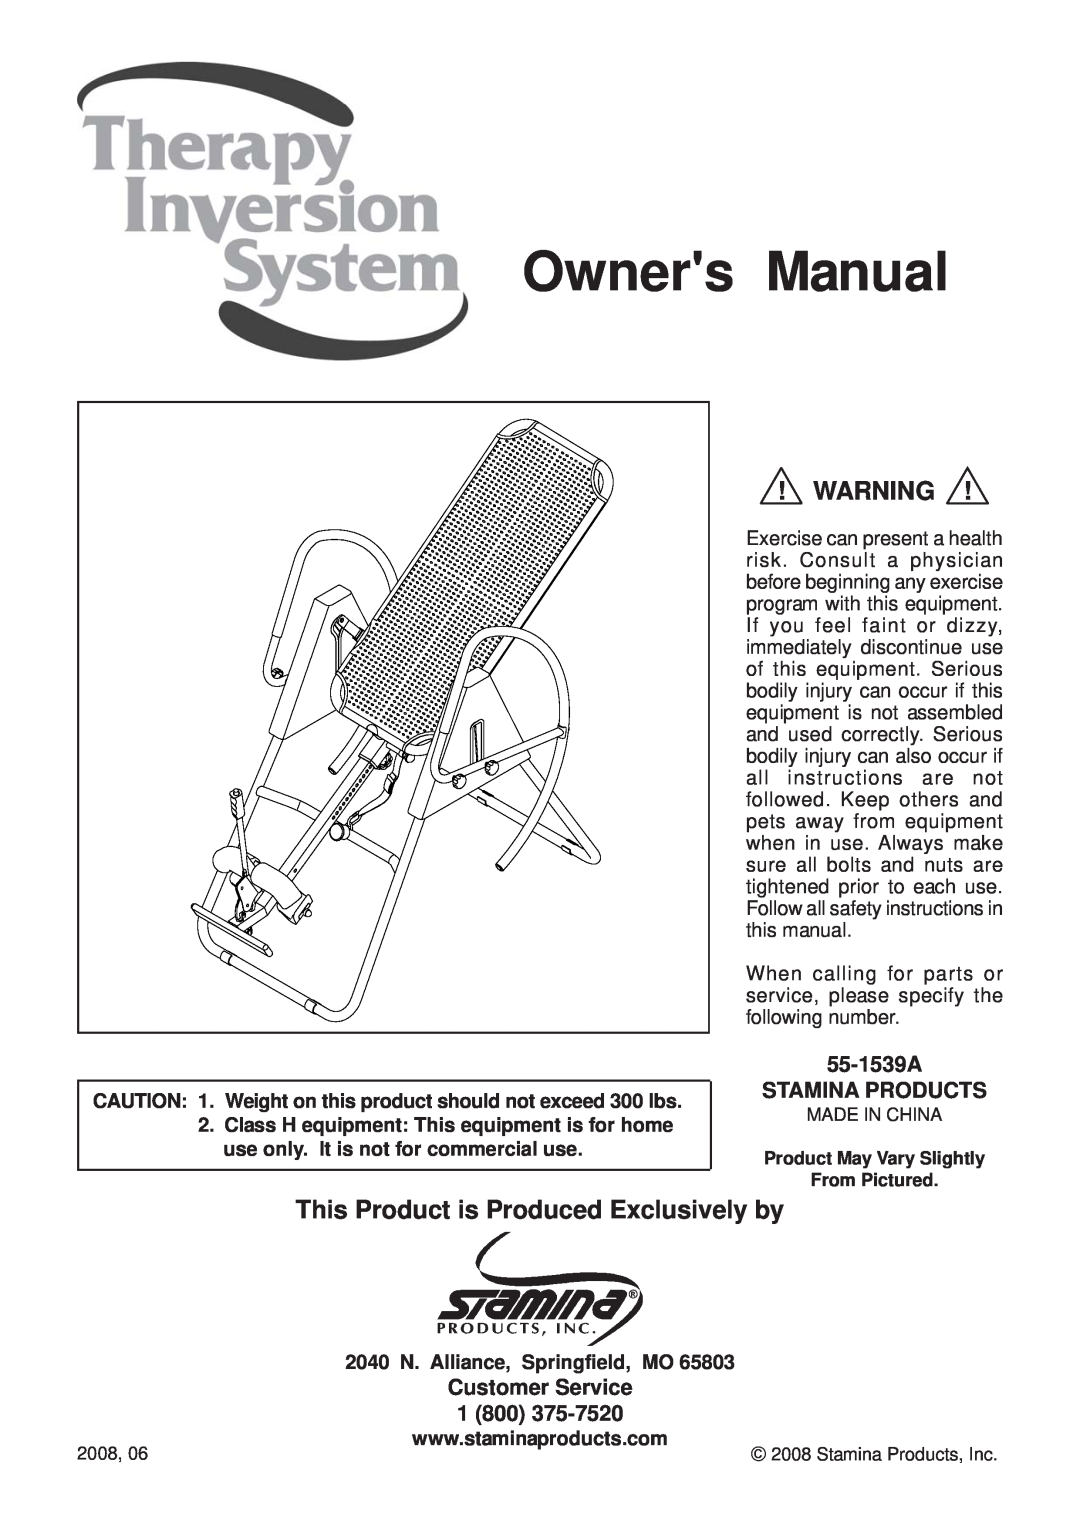 Stamina Products 55-1539A owner manual This Product is Produced Exclusively by, Owners Manual 